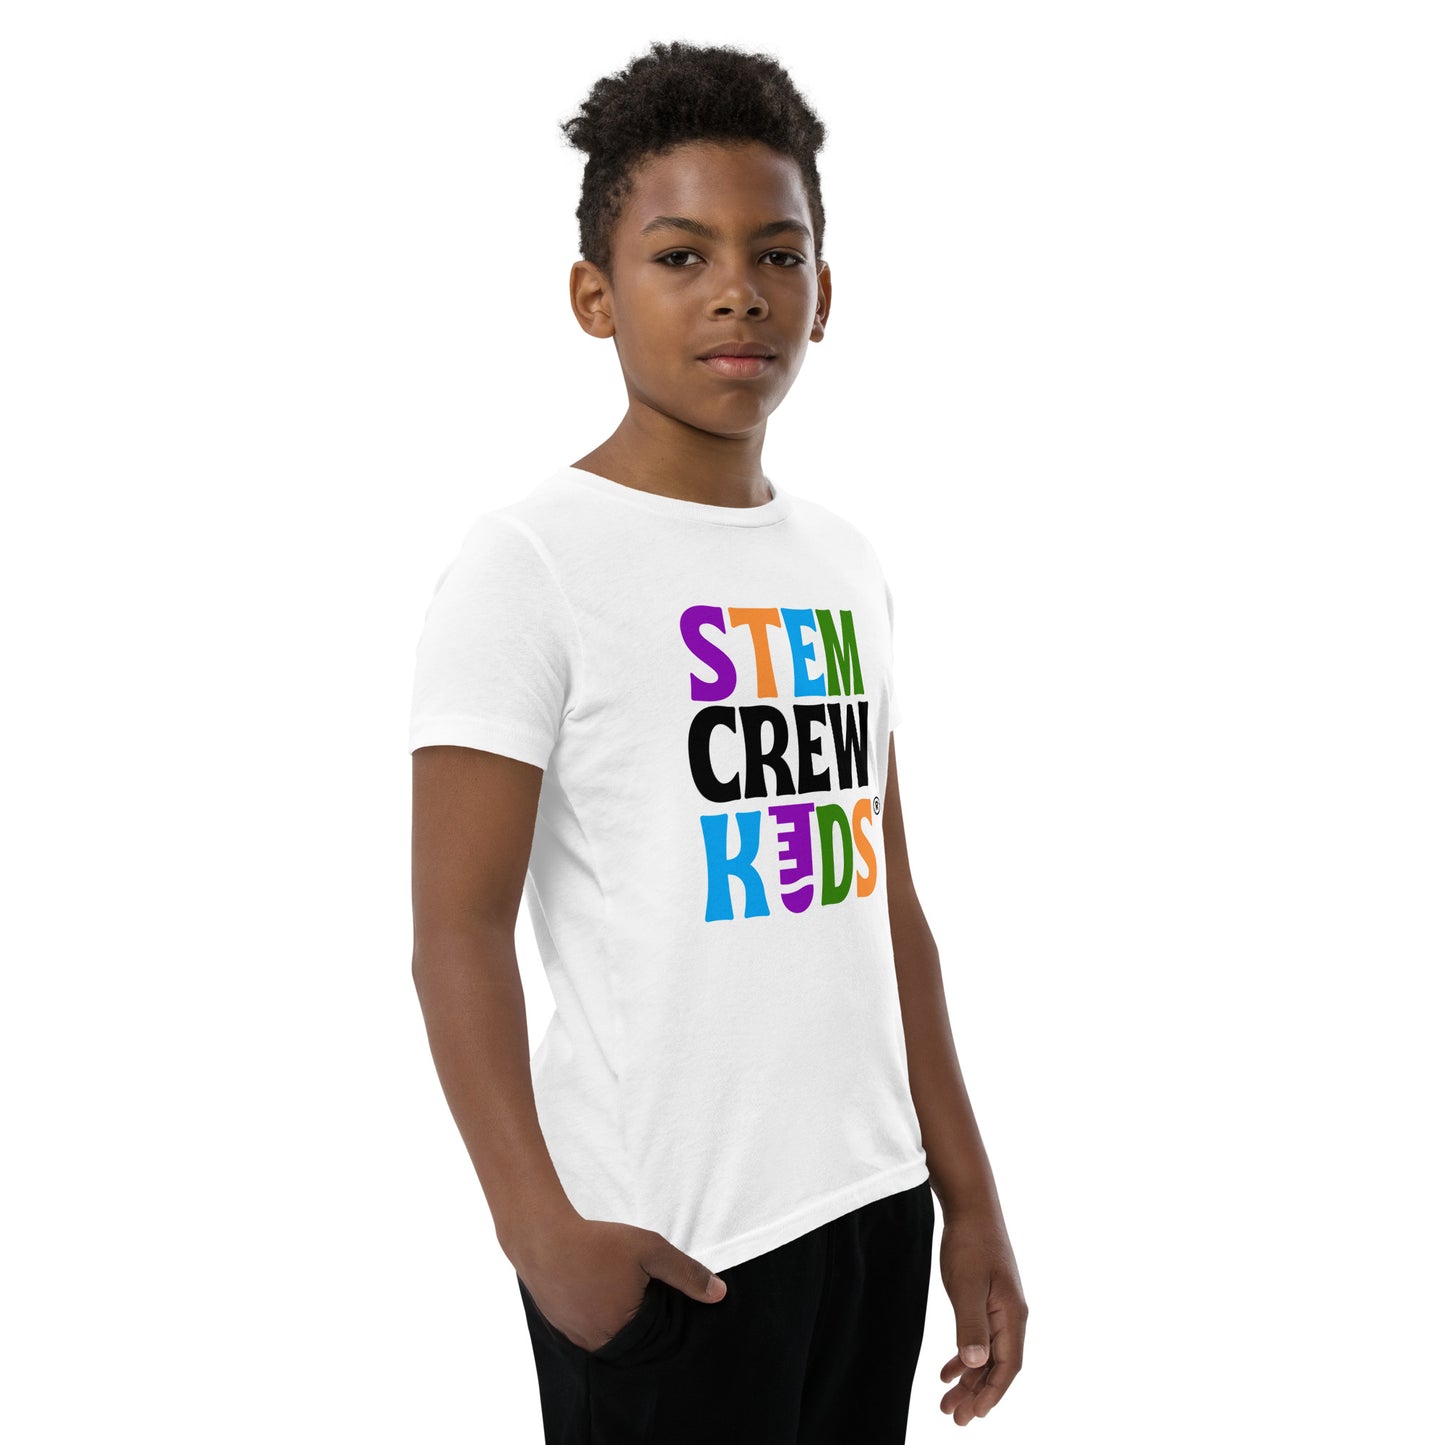 STEM Crew Kids Youth Short Sleeve T-Shirt (Colorful)